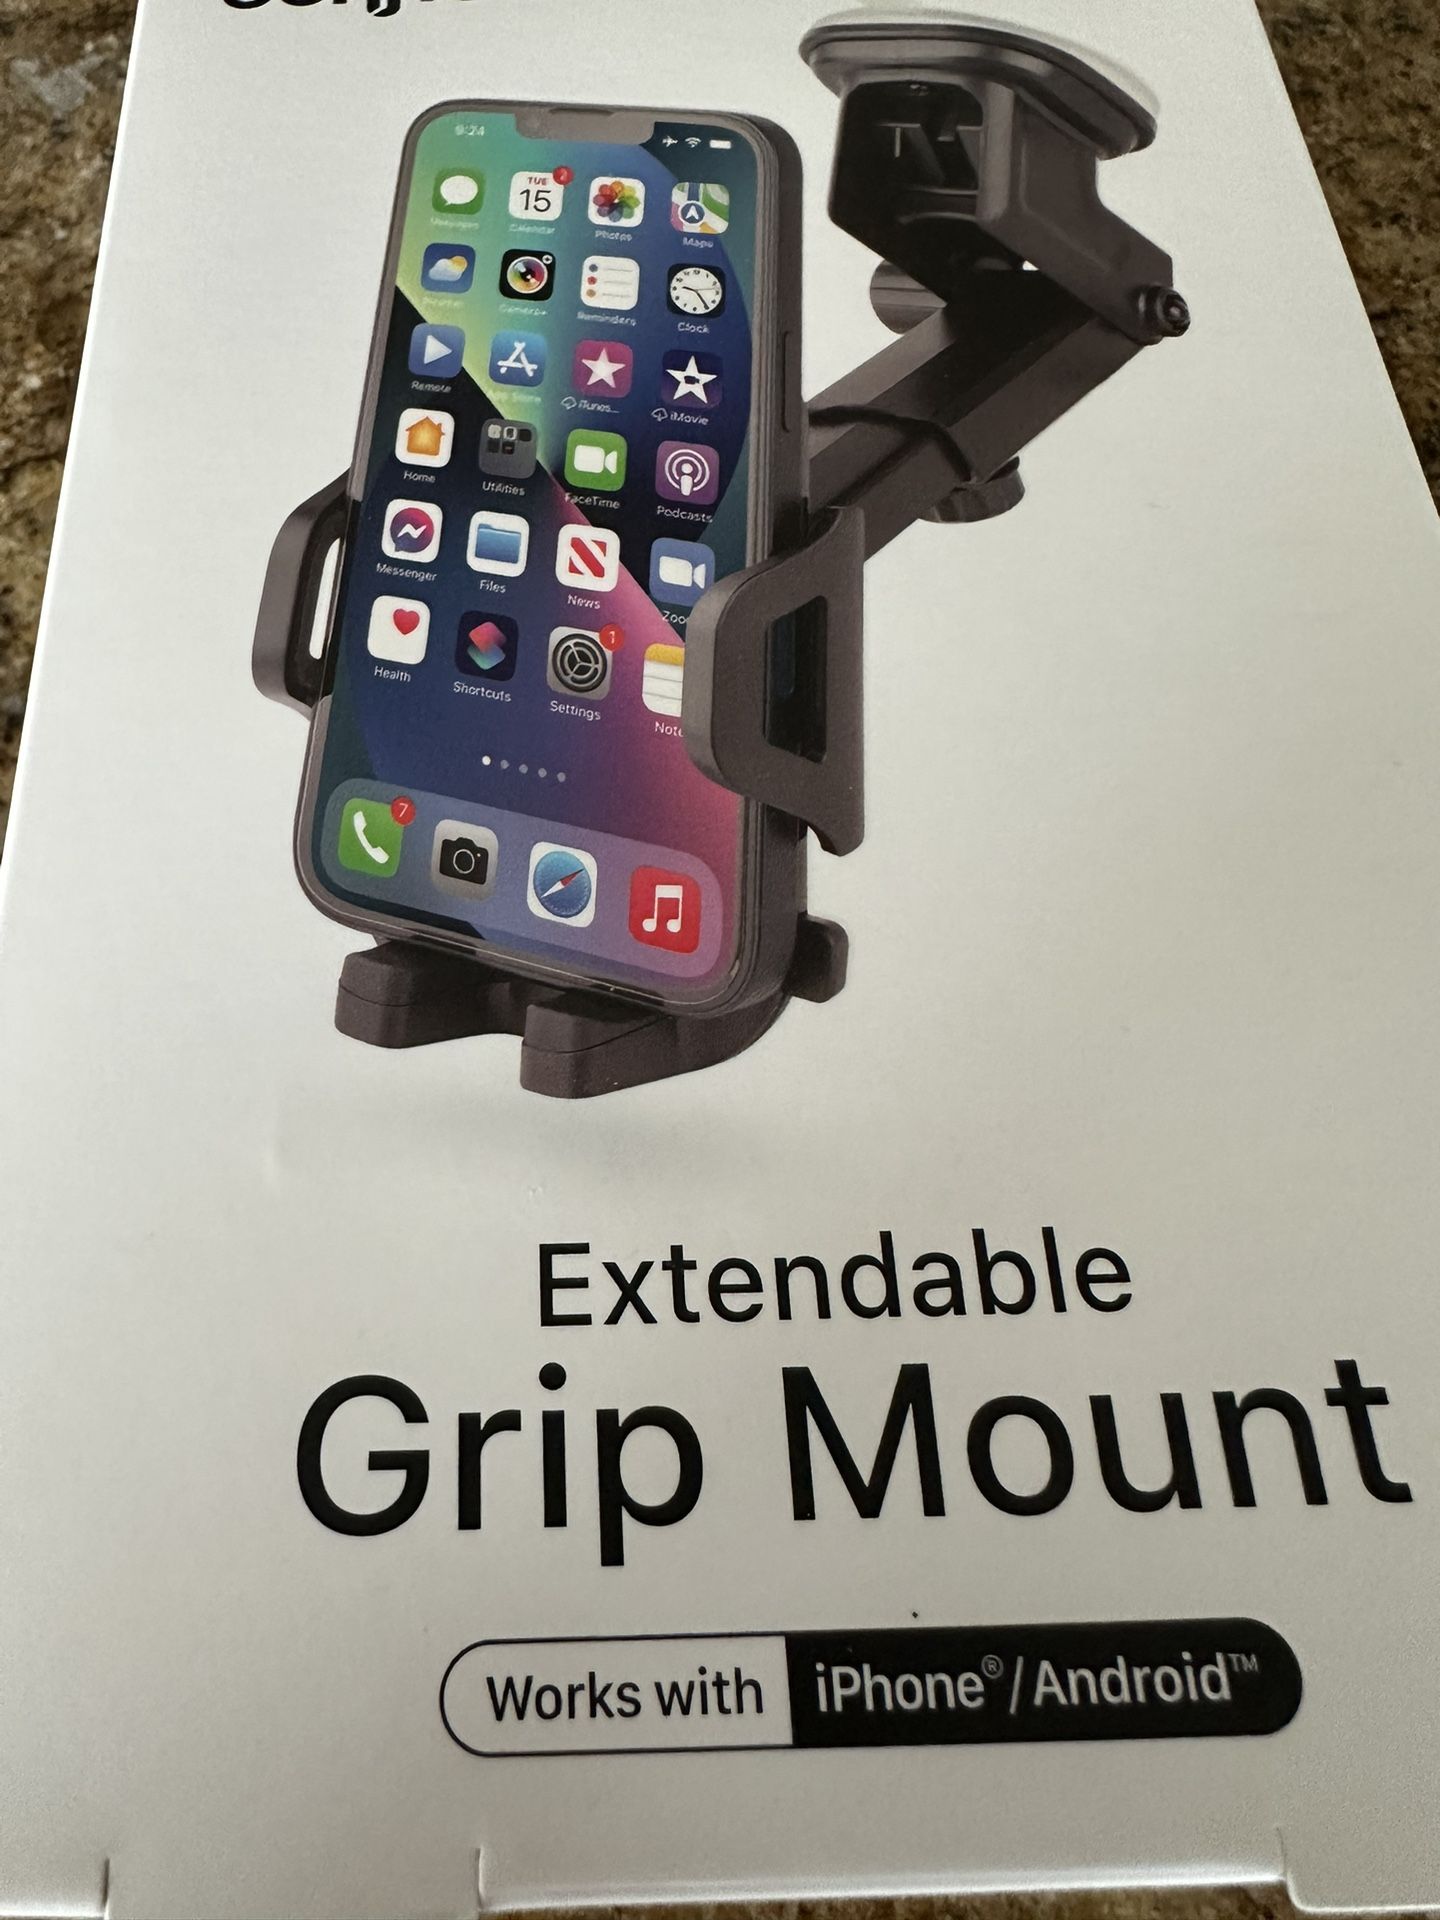  2 Expandable Grip Mount.  Works With iPhone/Android